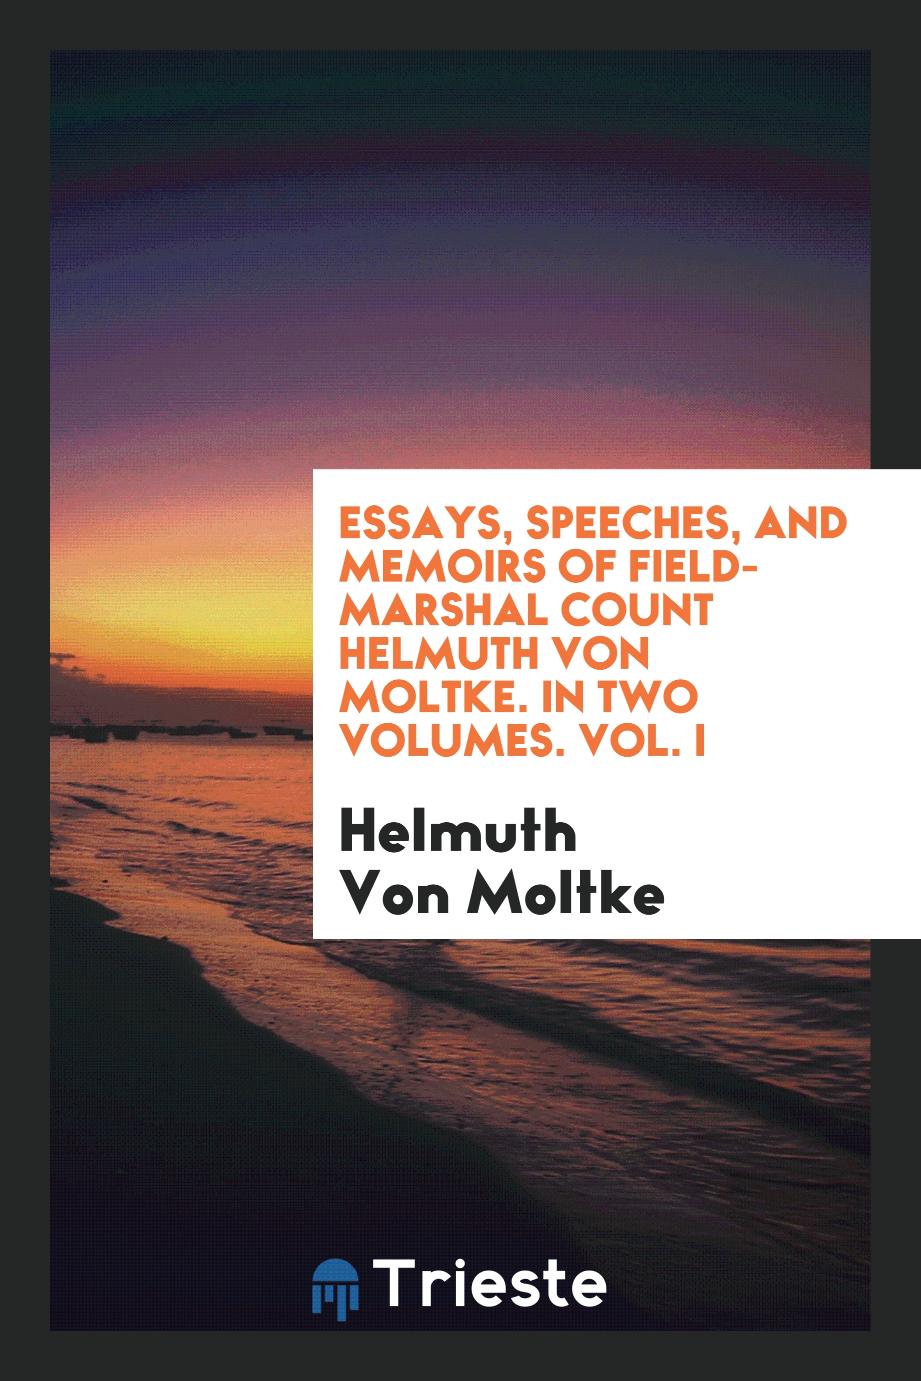 Essays, Speeches, and Memoirs of Field-Marshal Count Helmuth Von Moltke. In Two Volumes. Vol. I